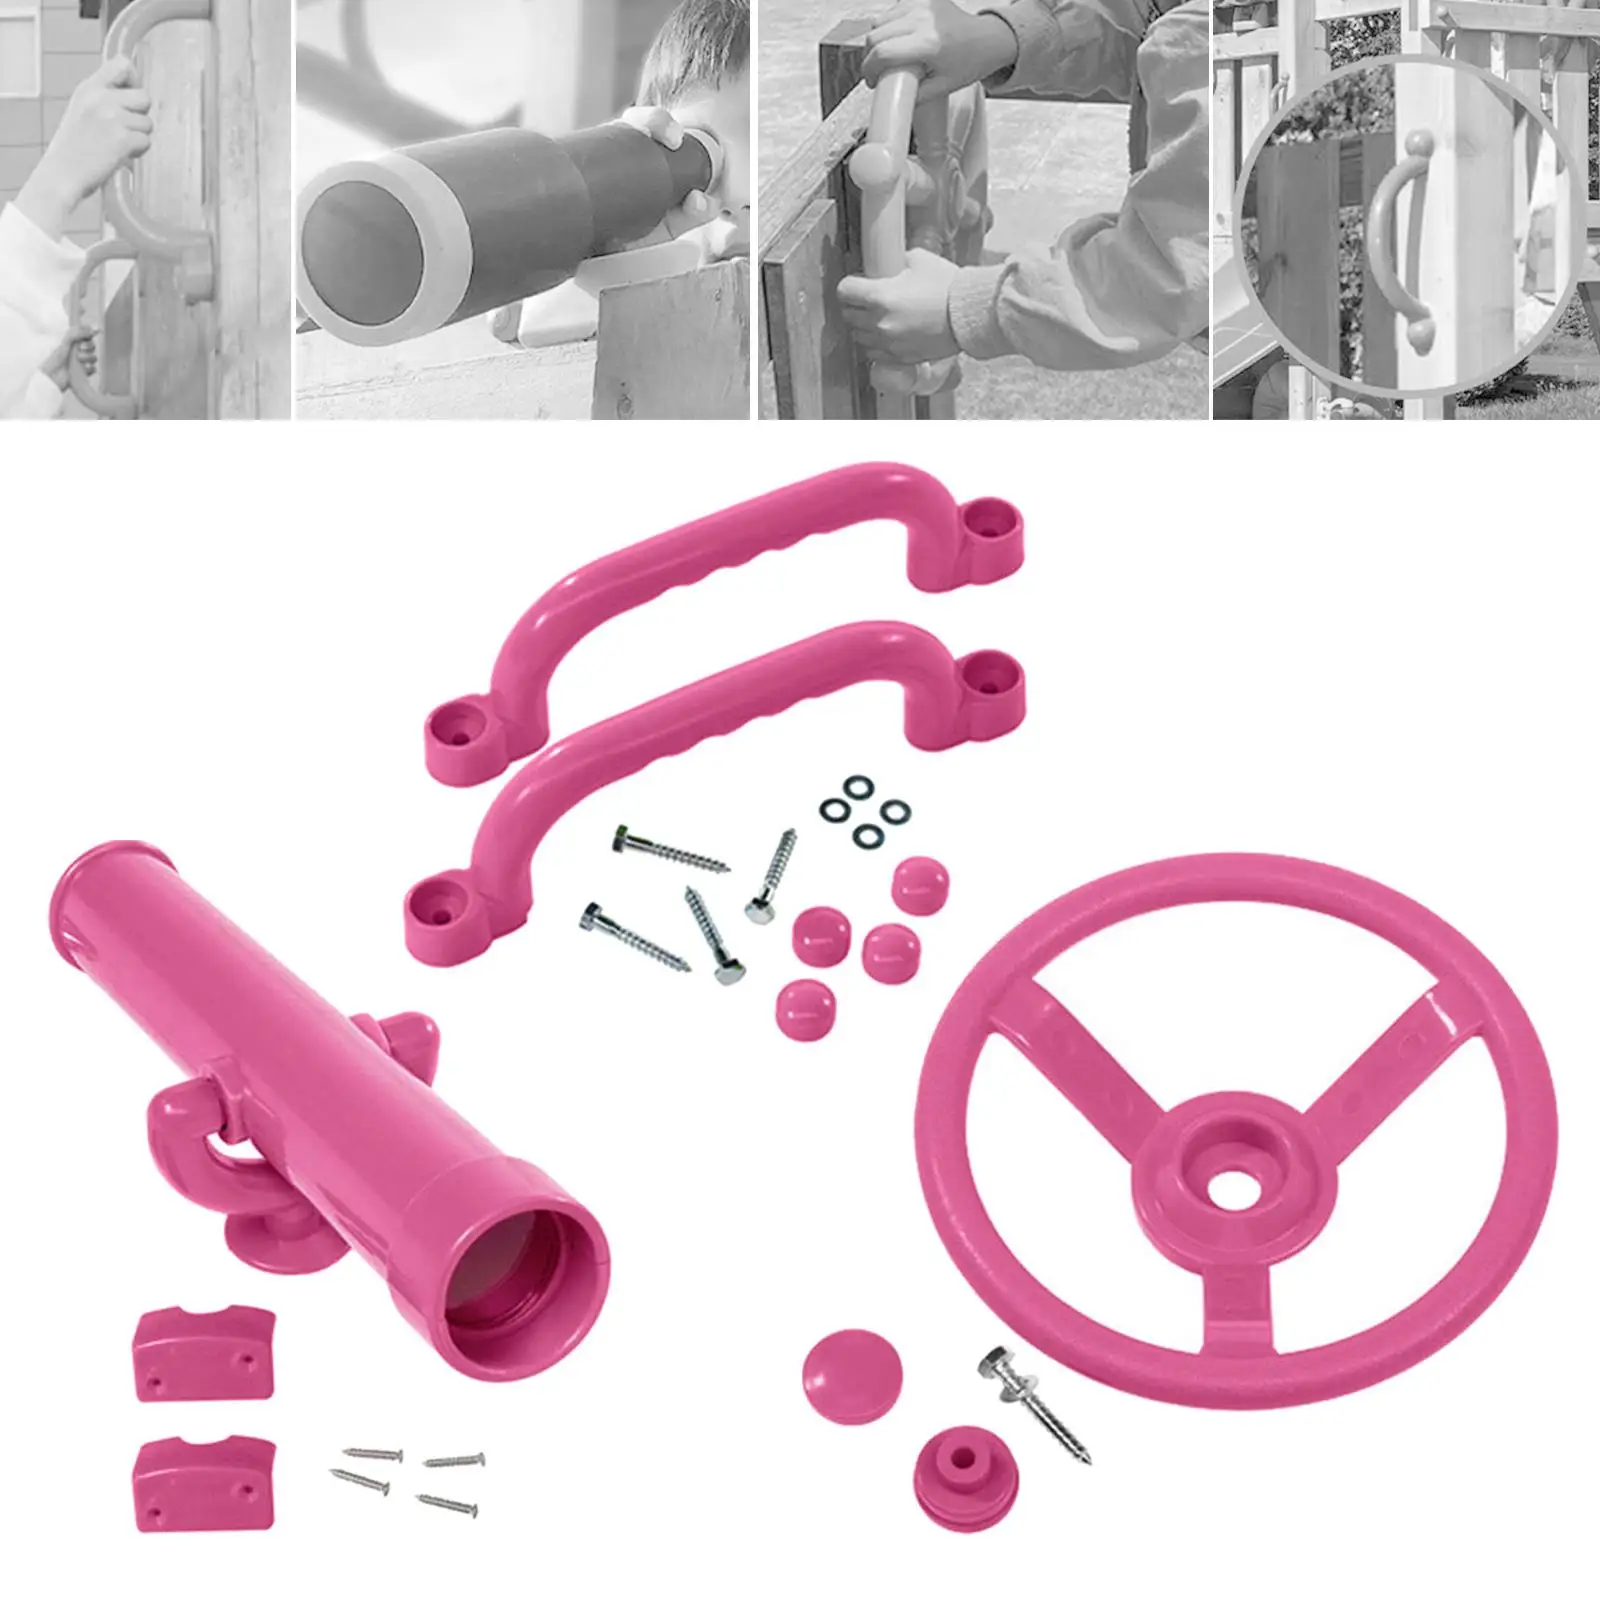 Playground Equipment Pink Set Easy to Install Pirate Ship Wheel for Kids for Swingset Backyard Tree House Jungle Gym Attachments